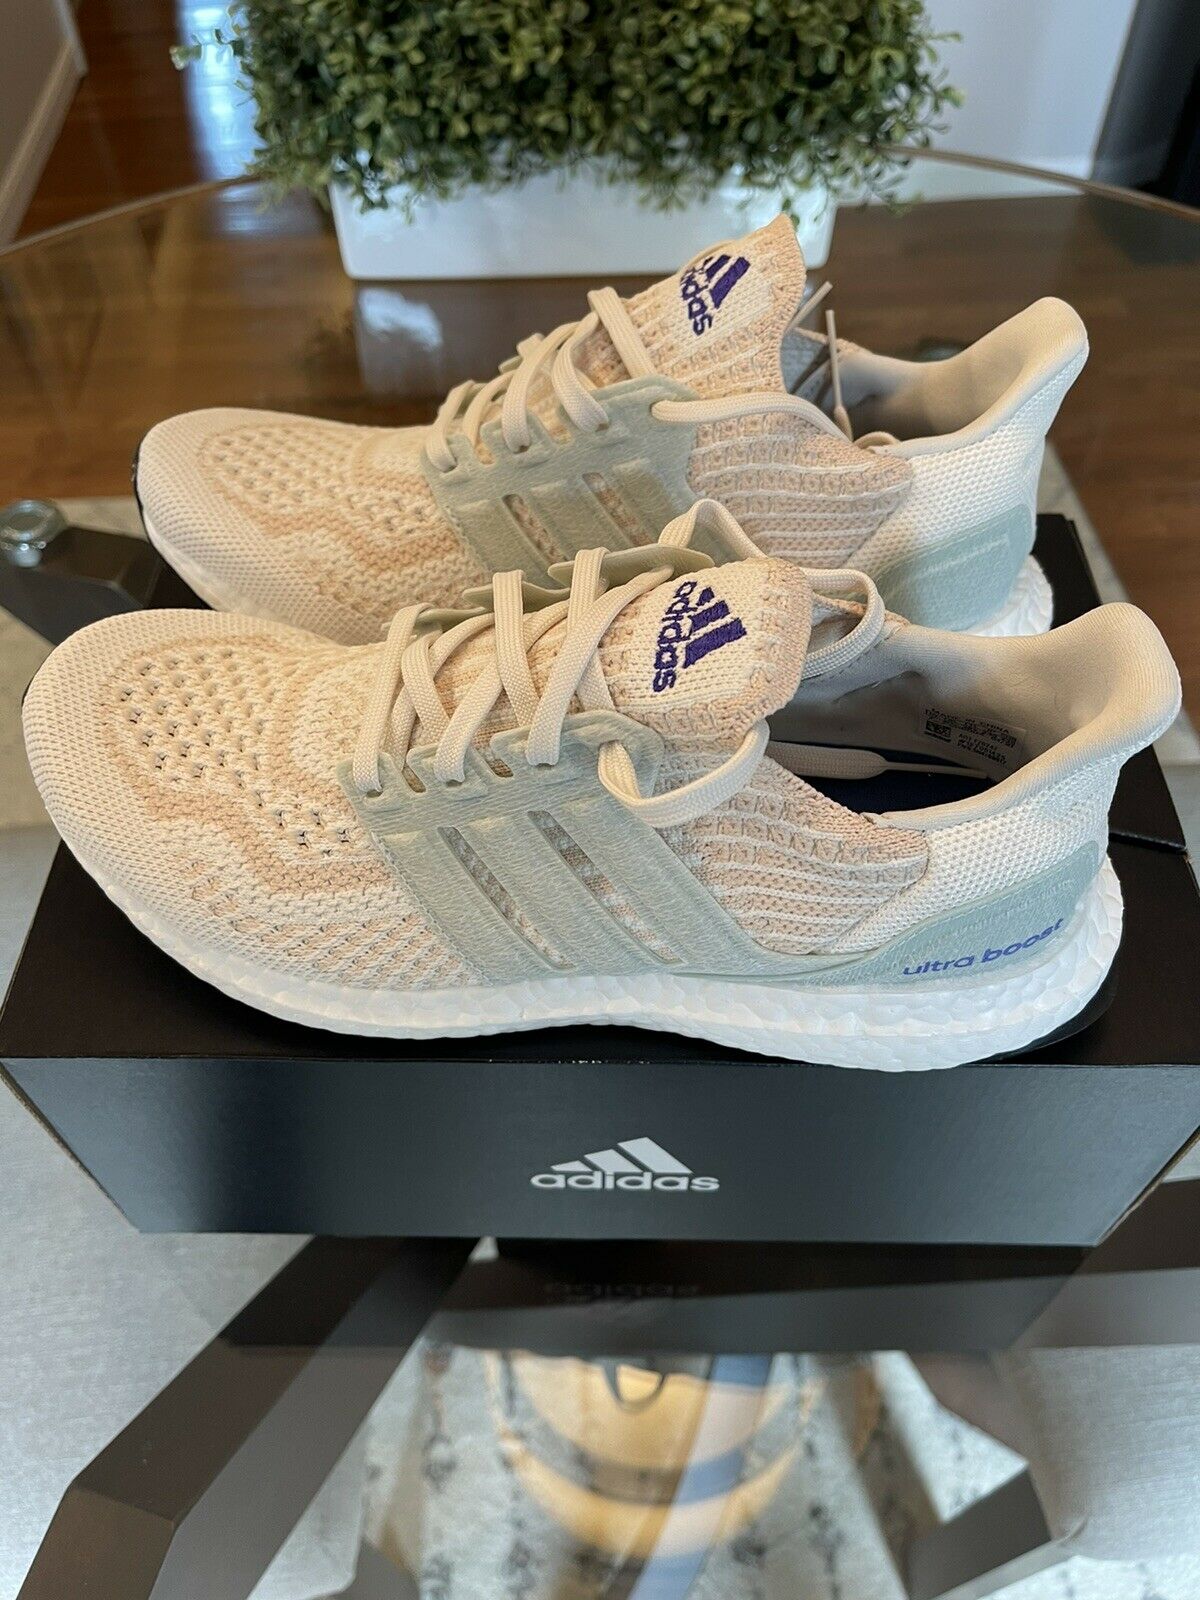 Women’s Adidas Ultraboost 6.0 DNA Shoes - New with Box Under Retail!